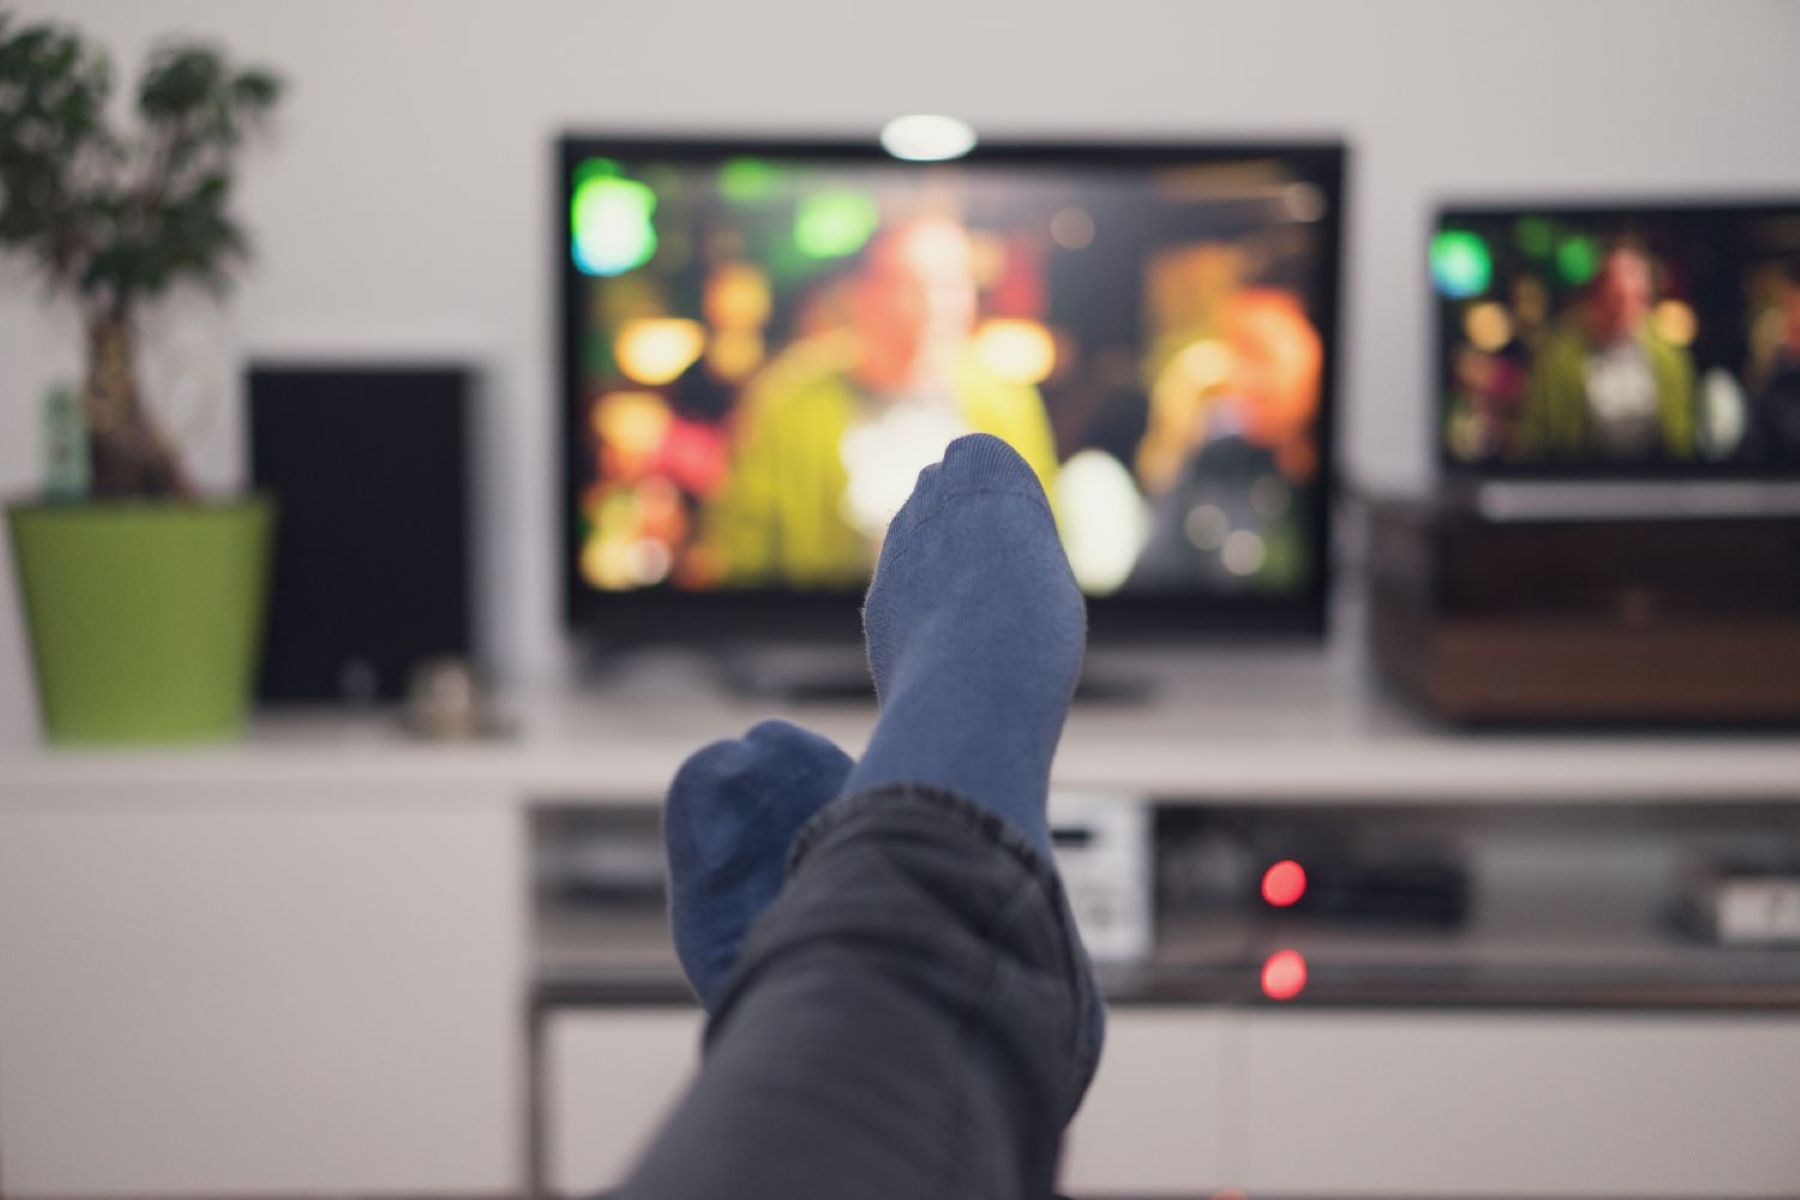 How To Watch Television Without Cable